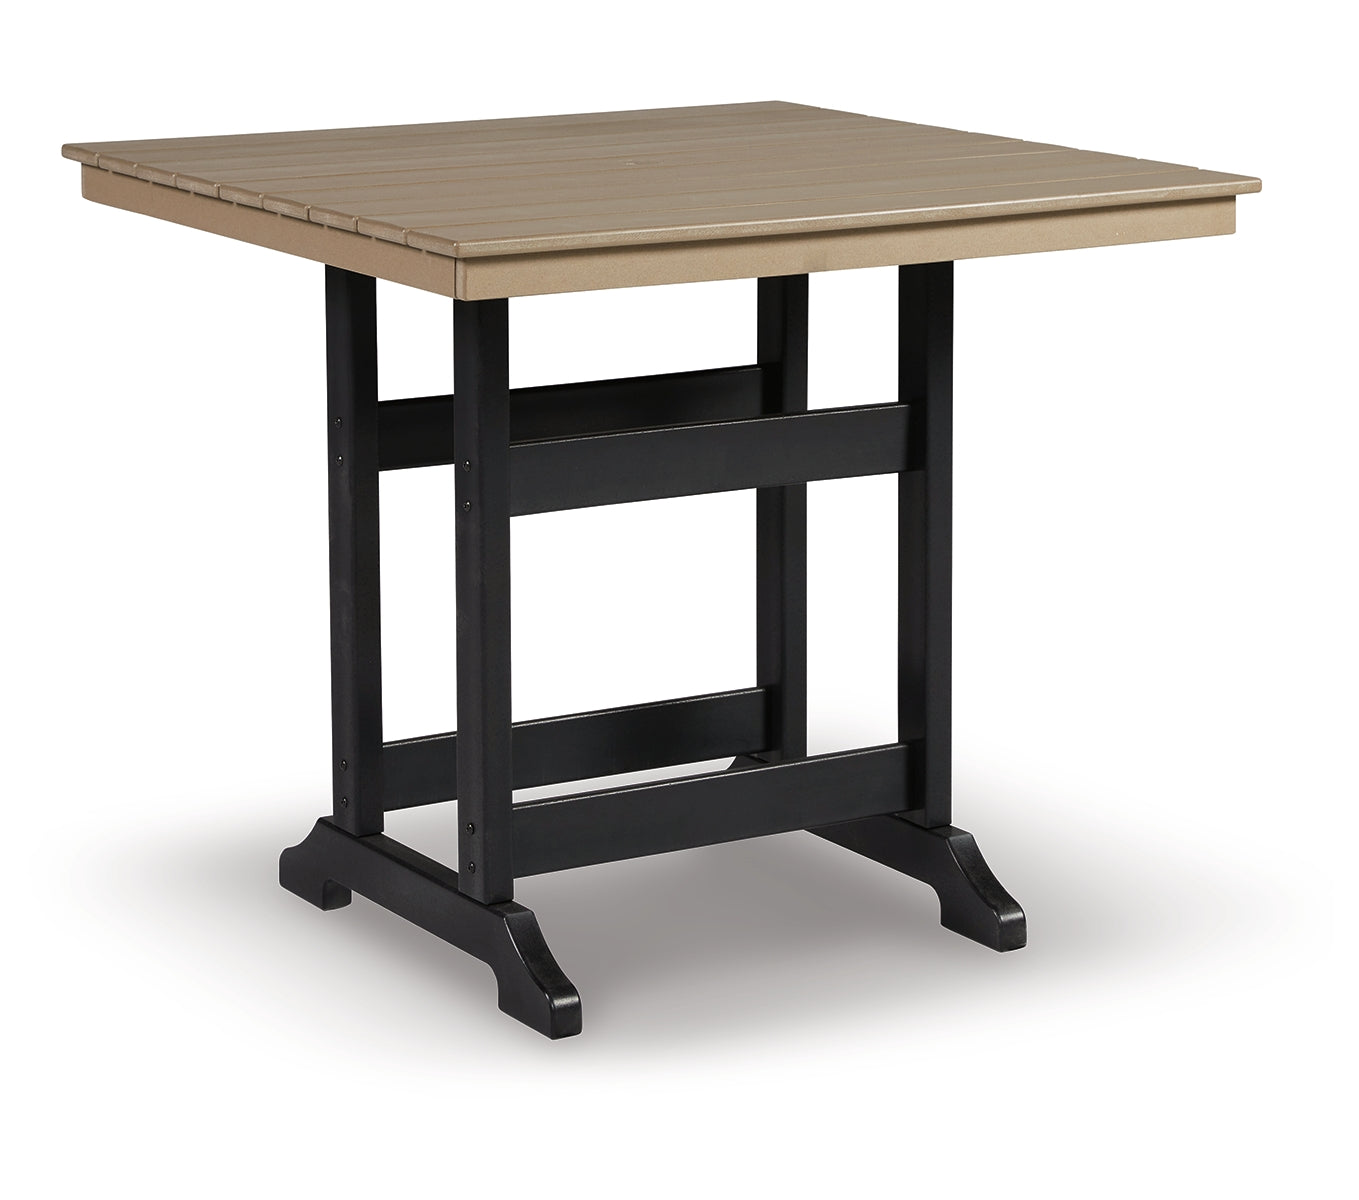 Fairen Trail Outdoor Counter Height Dining Table